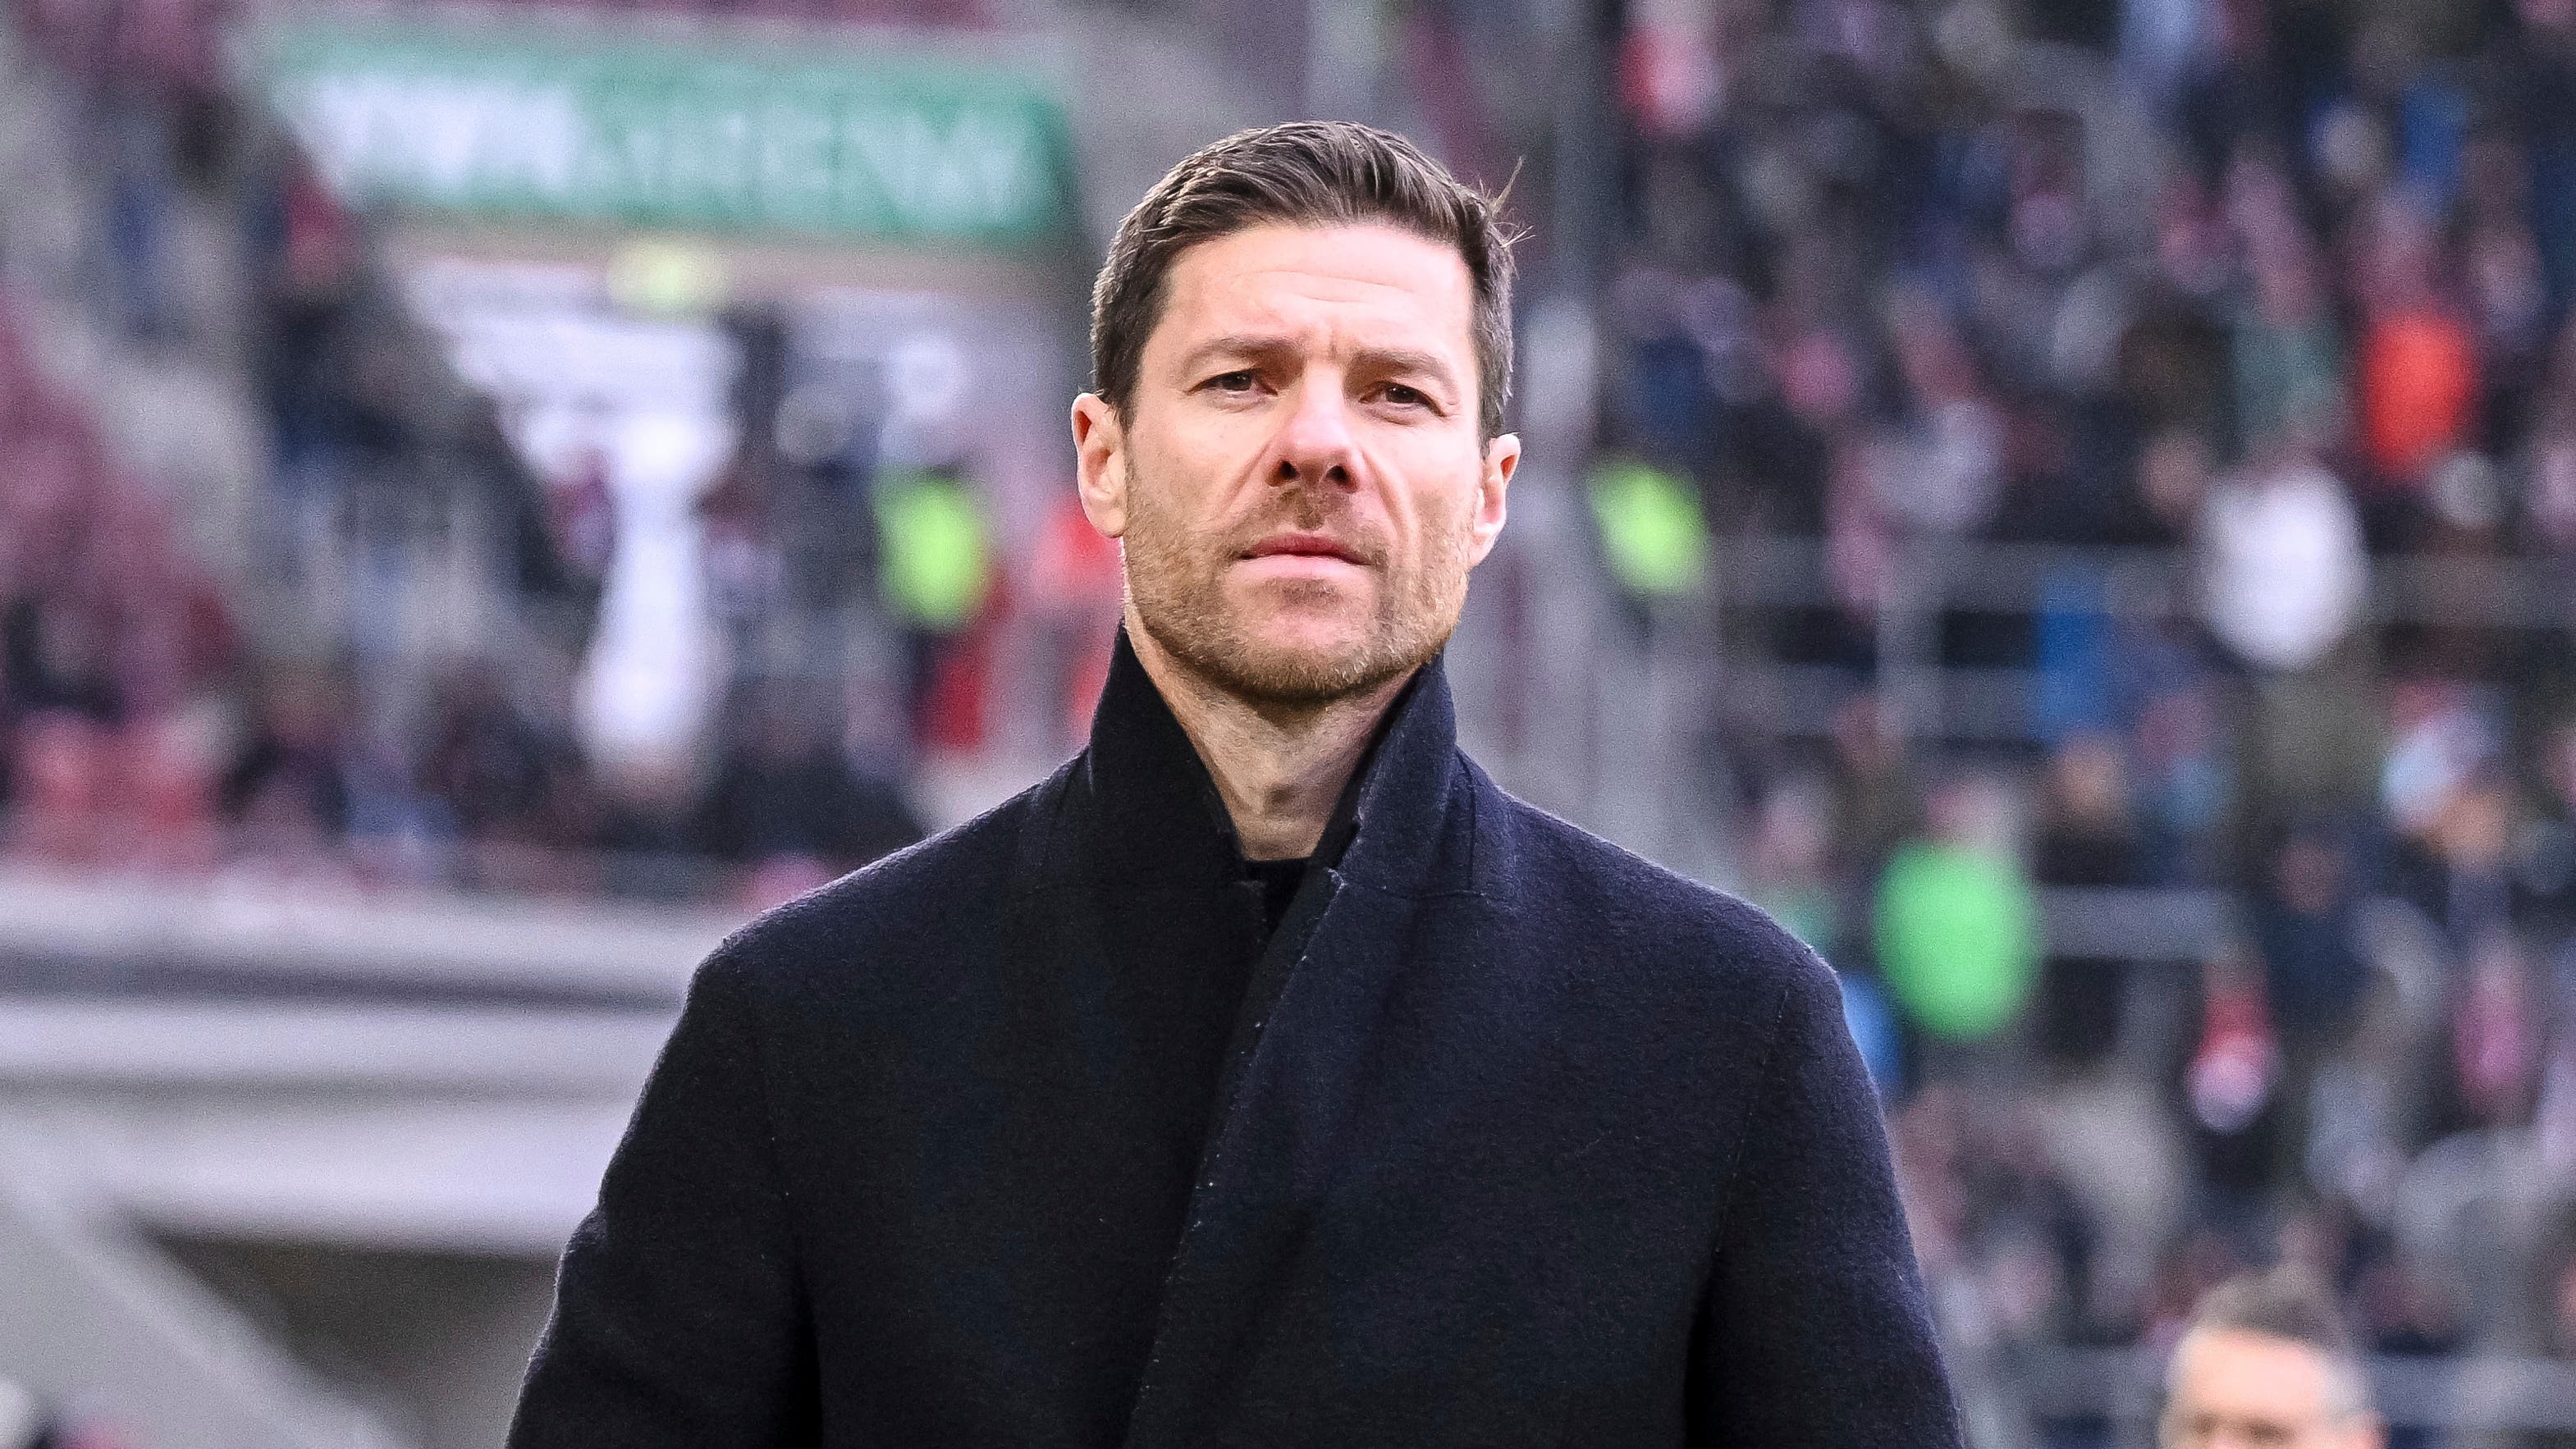 My focus is on Leverkusen: Xabi Alonso plays down Liverpool managerial link